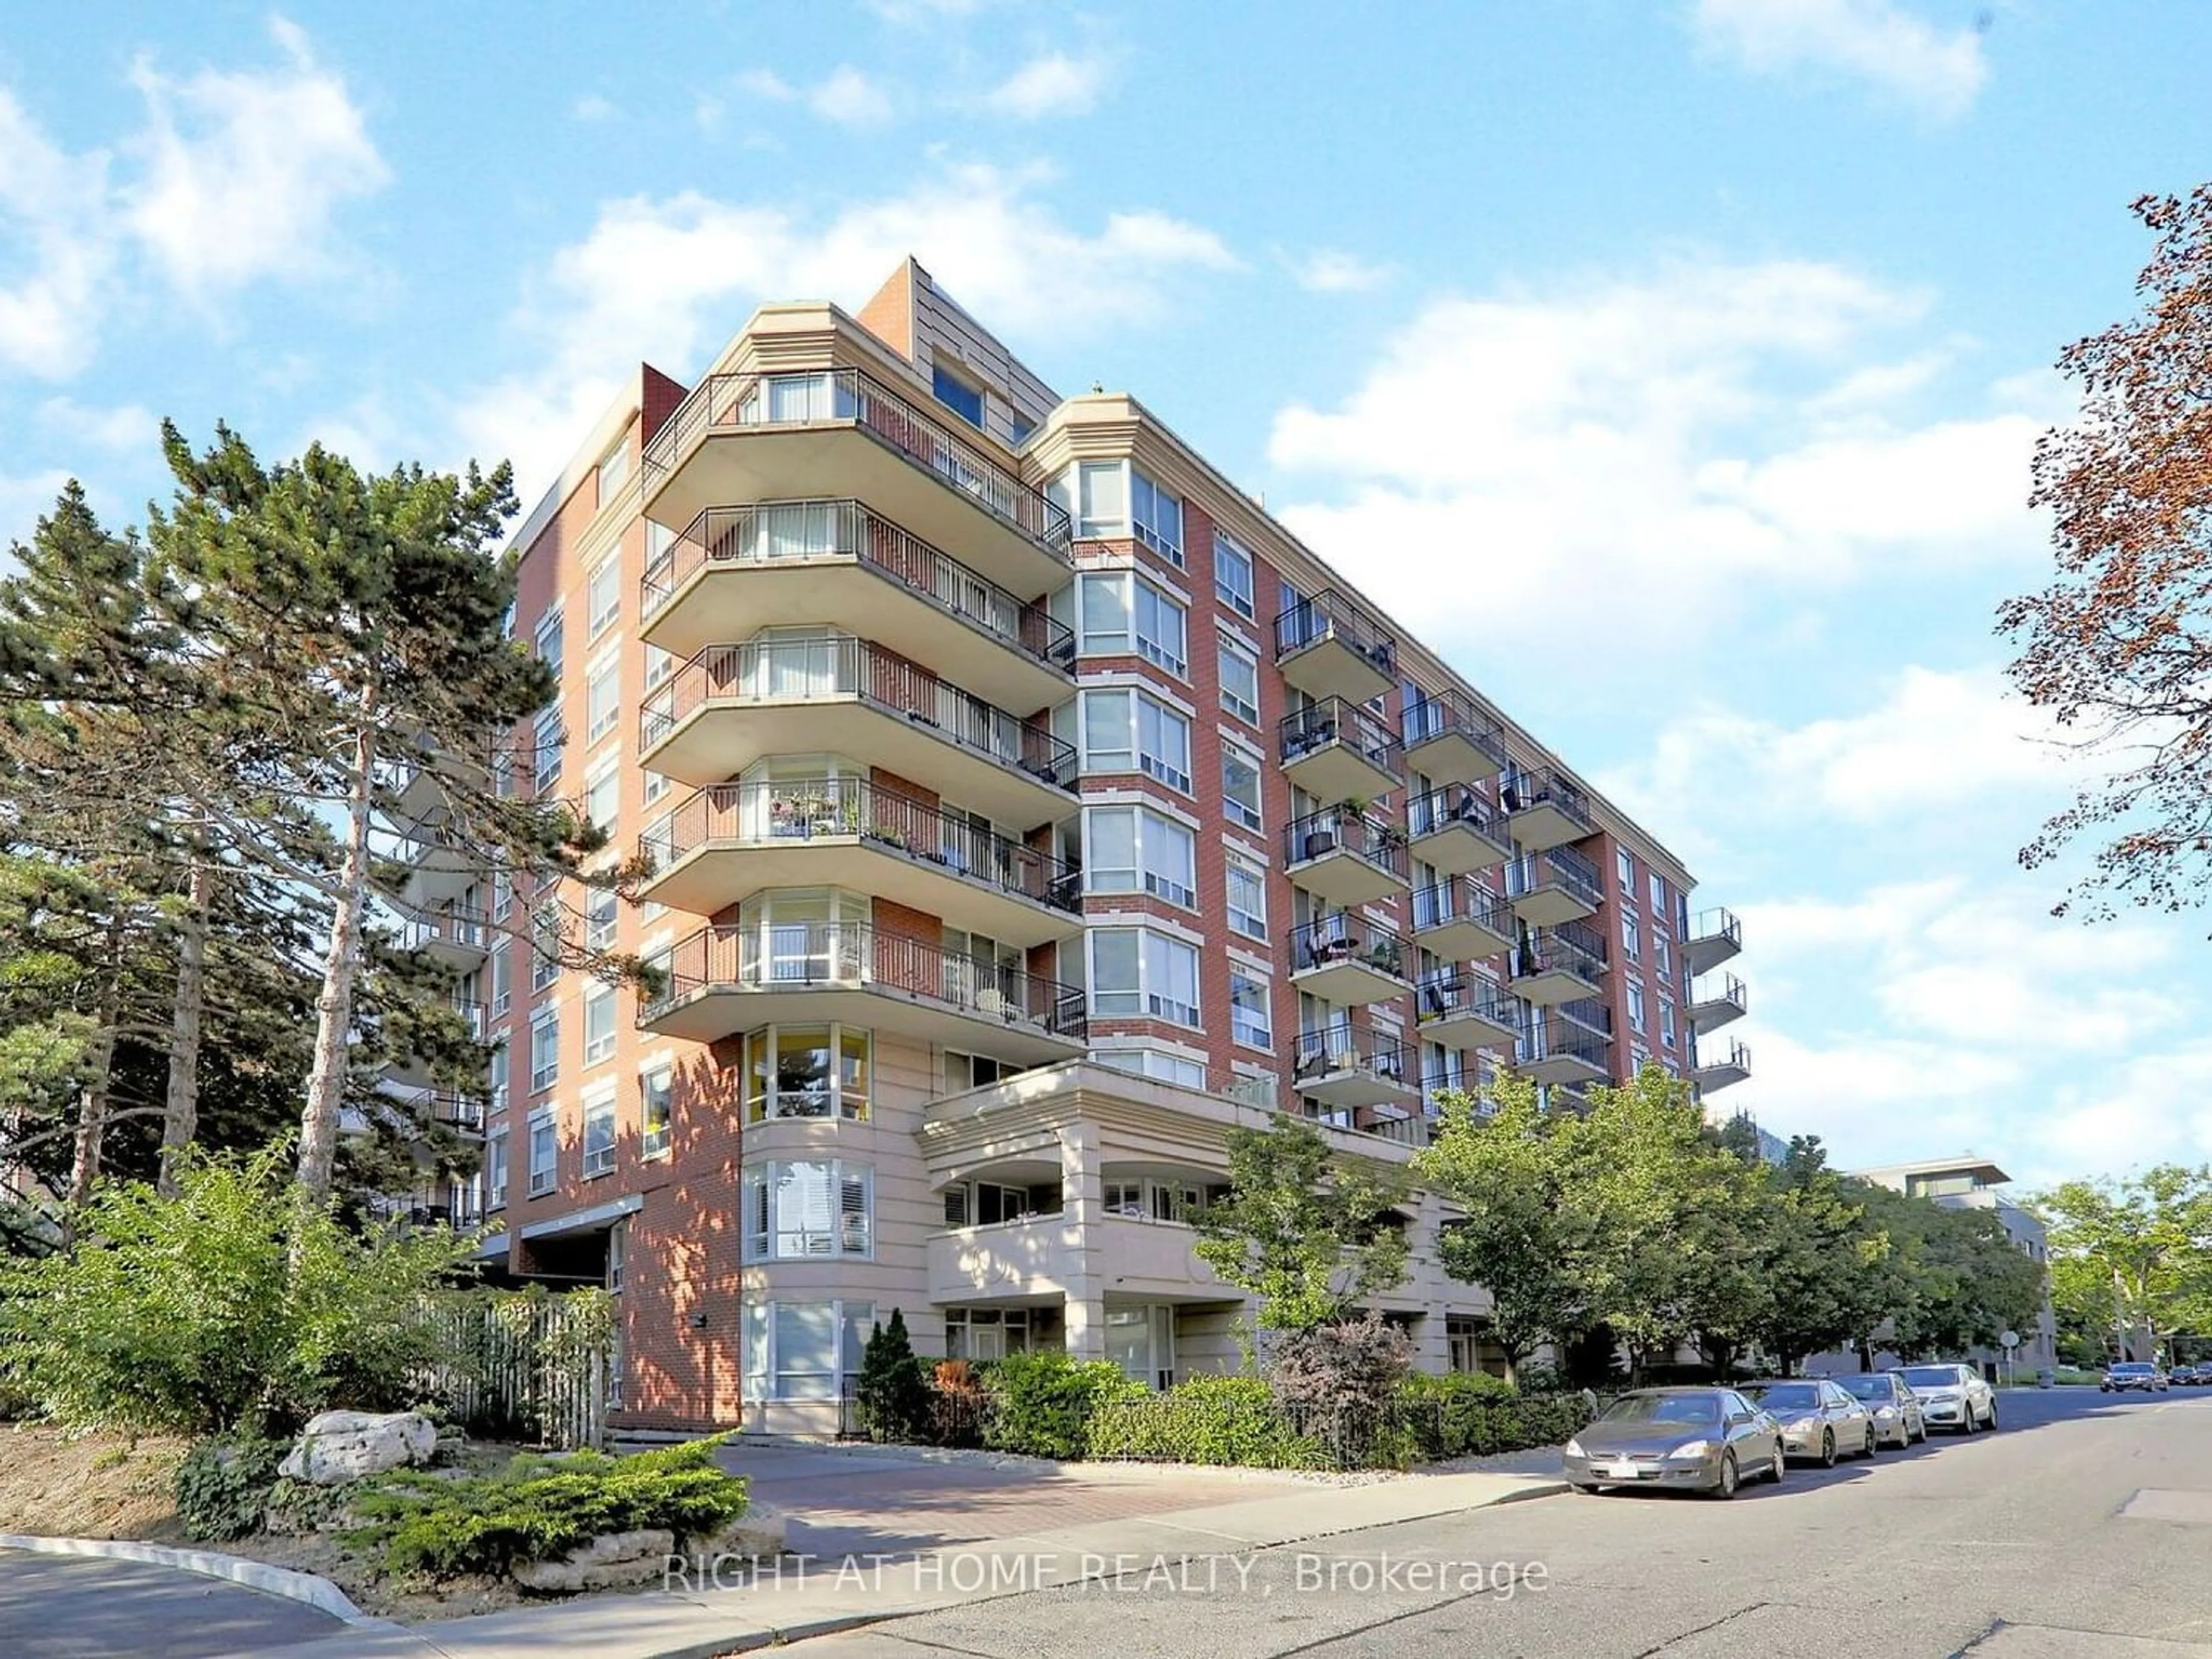 A pic from exterior of the house or condo for 300 Balliol St #303, Toronto Ontario M4S 3G6